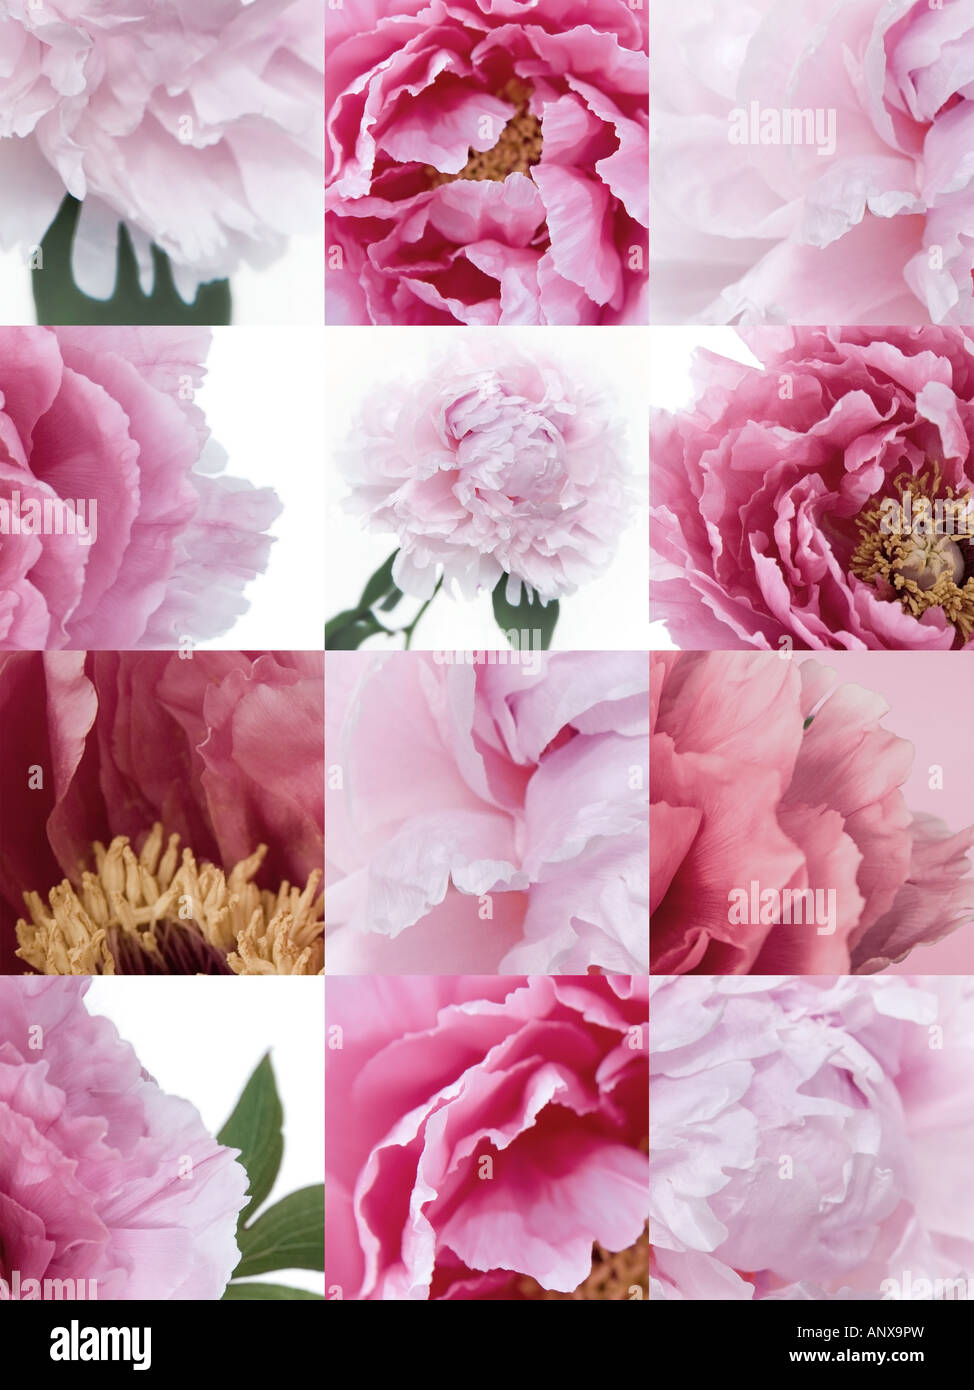 Peony flower step and repeat deign photo illustration Stock Photo